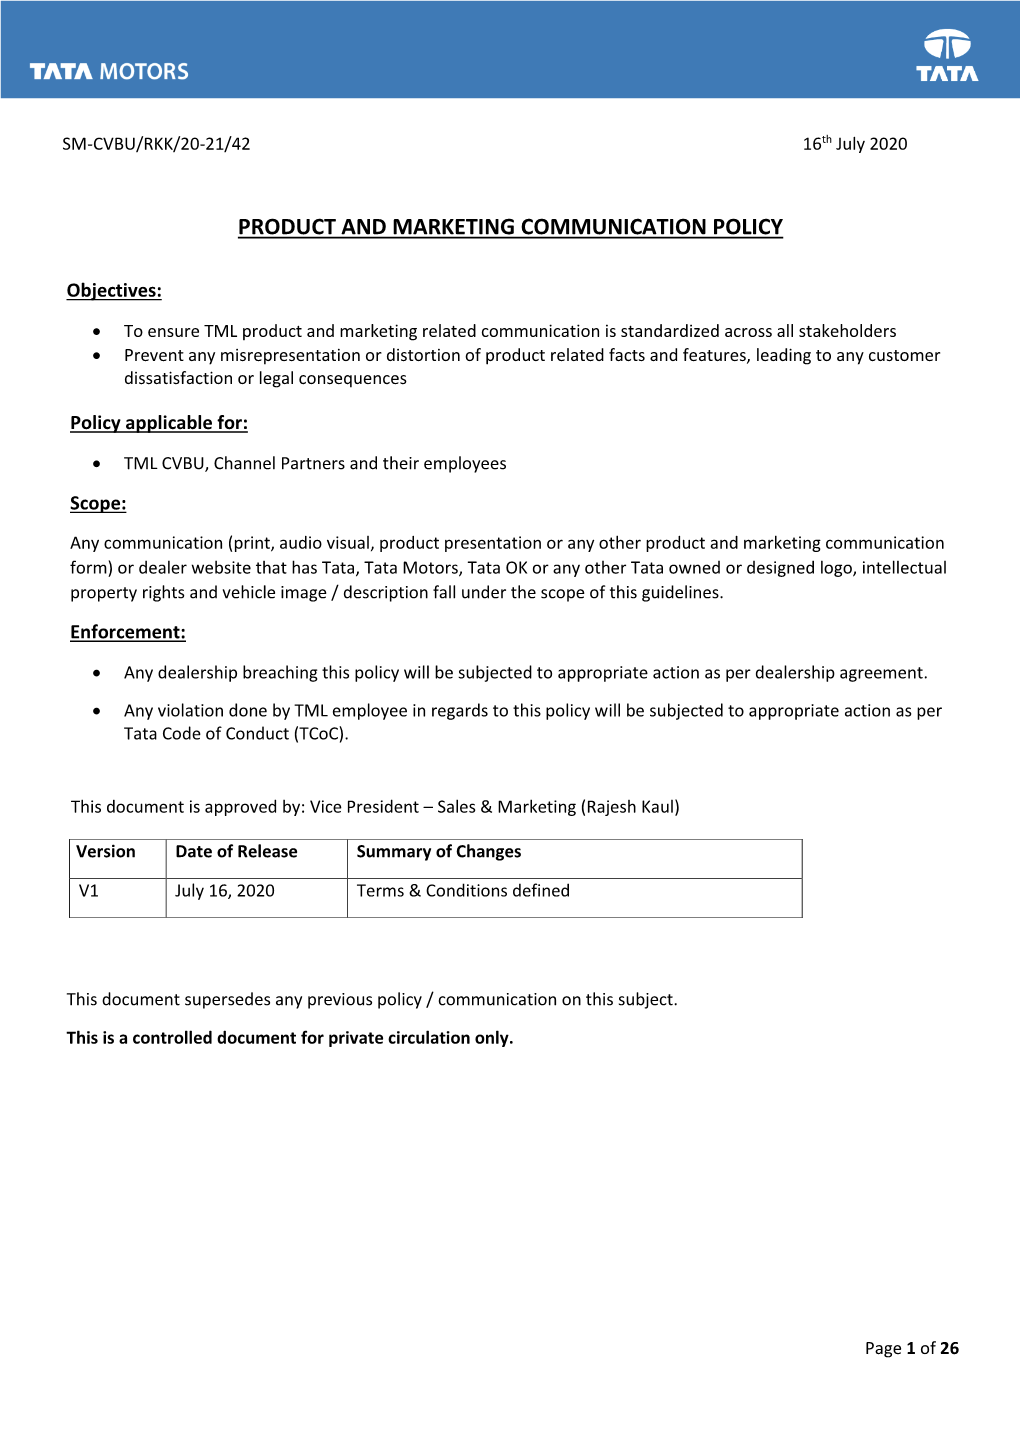 Product and Marketing Communication Policy